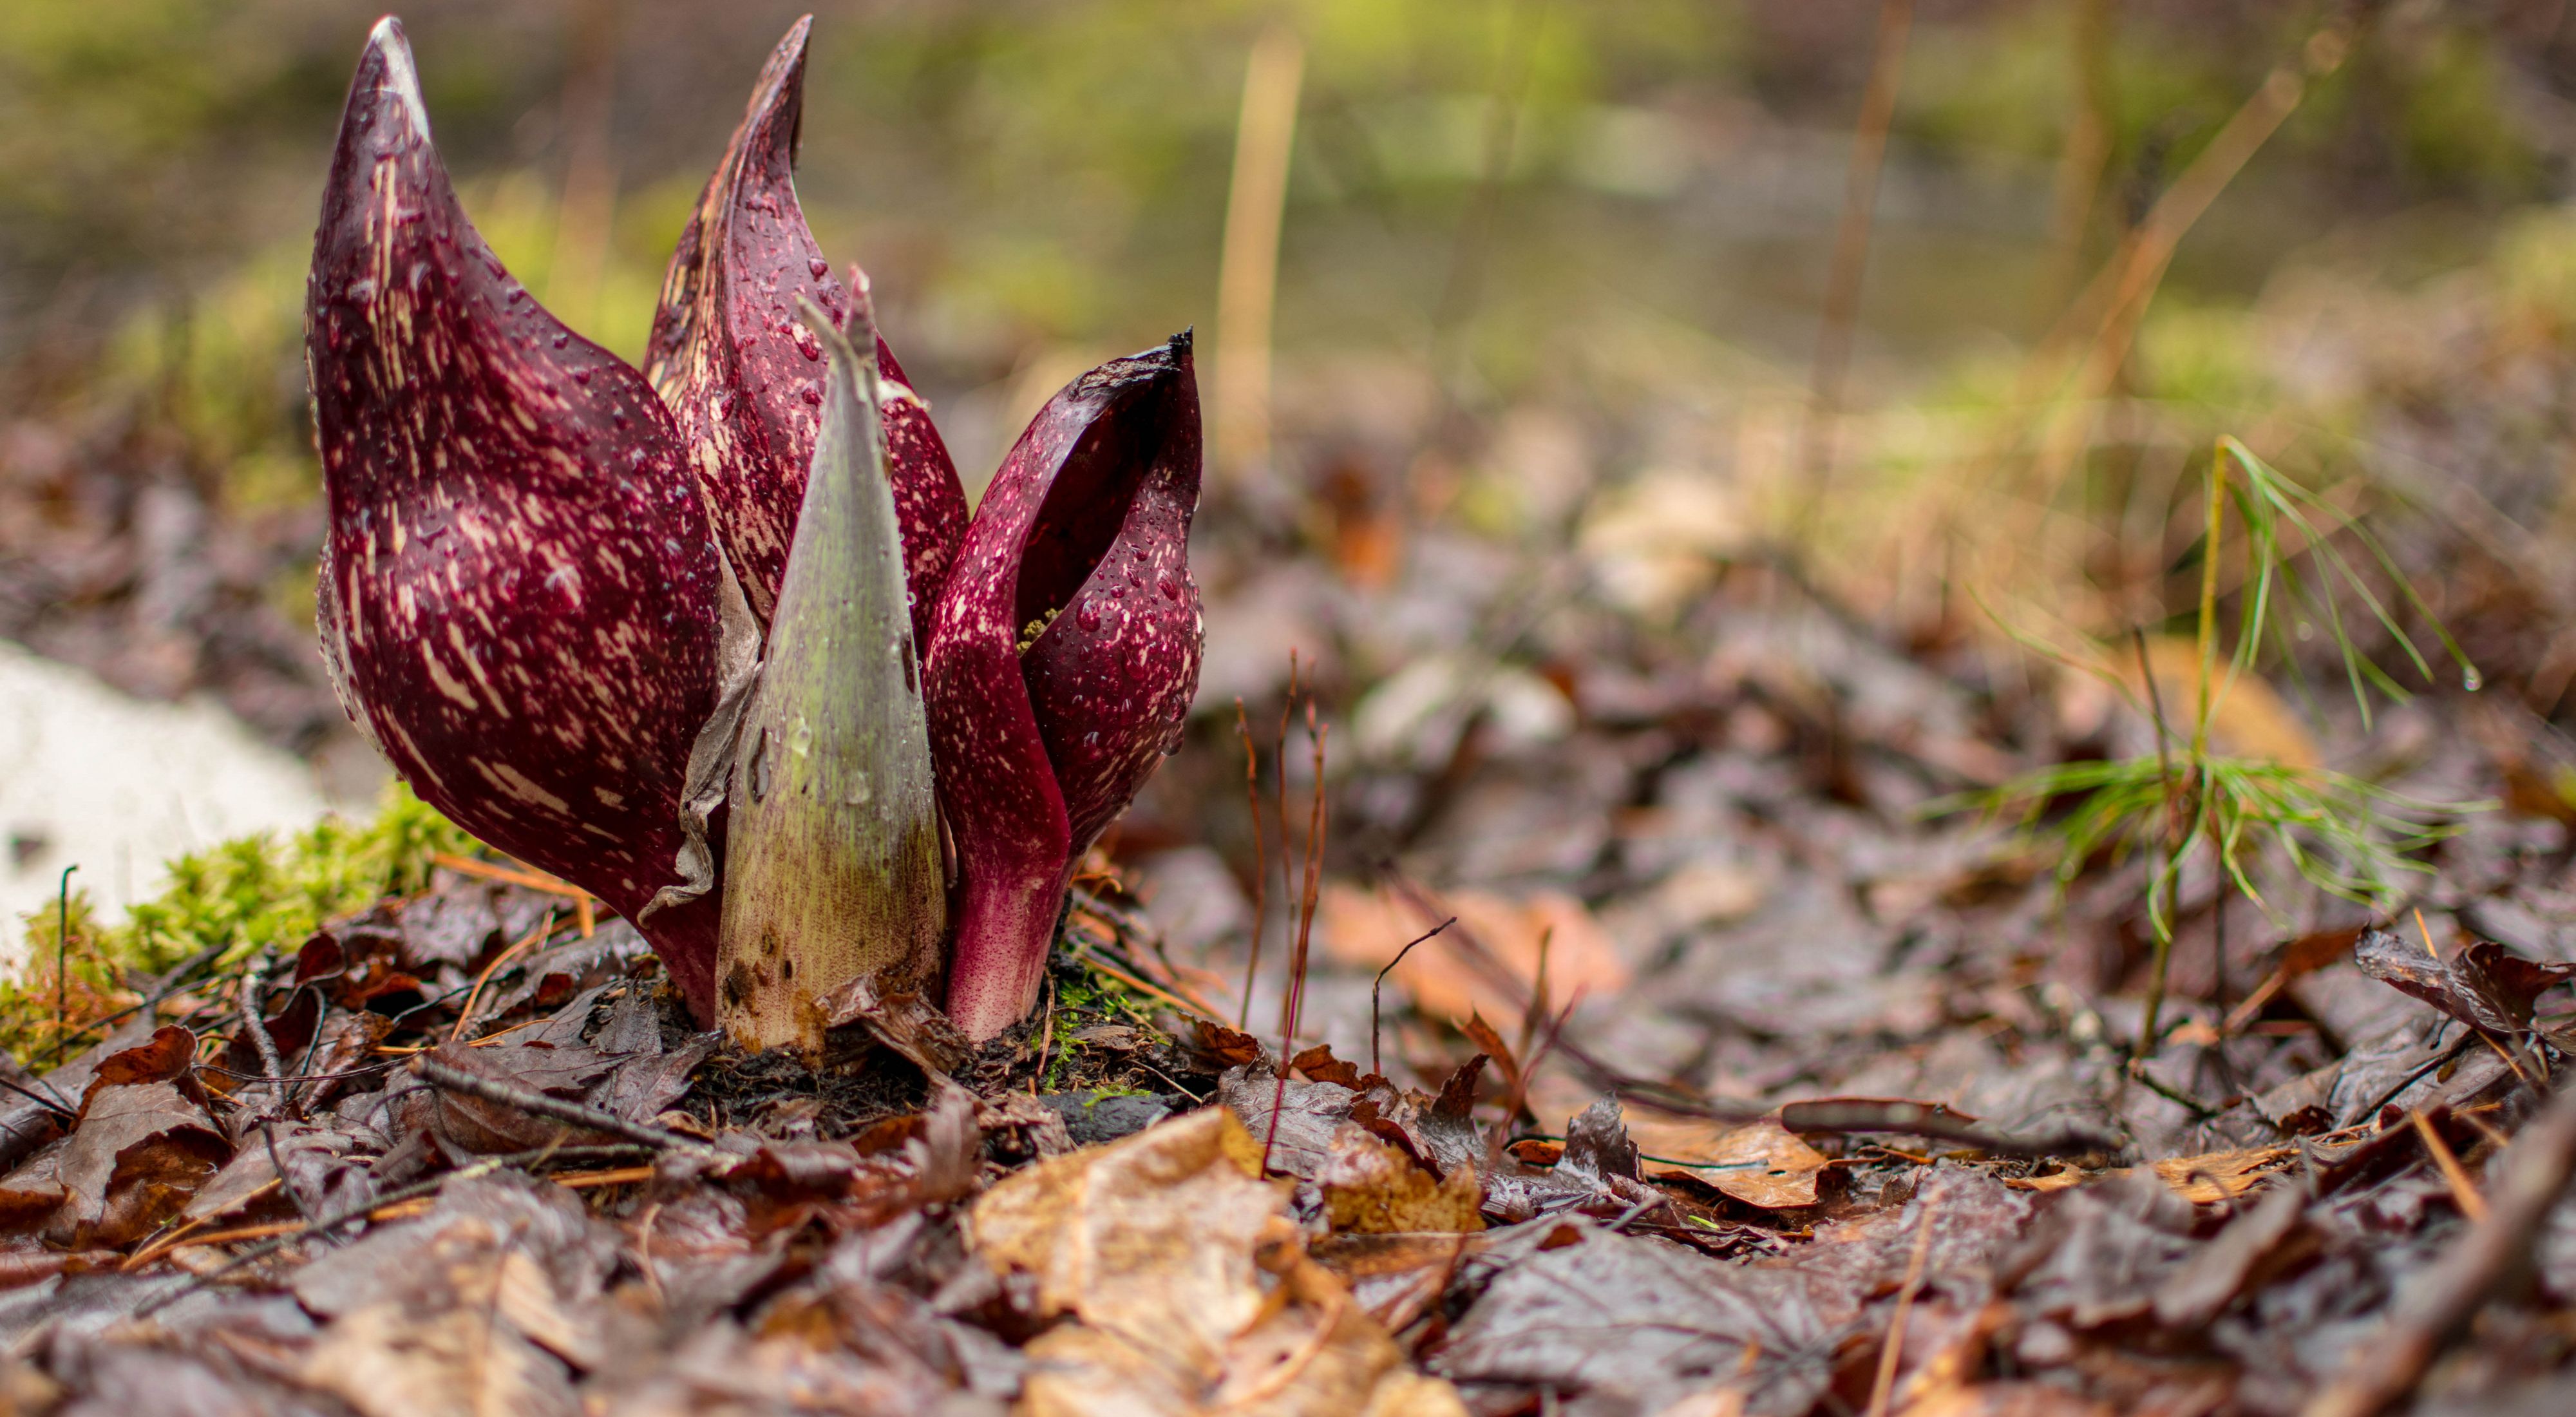 A close-up view of a dark purple skunk cabbage plant on the center lefthand side of the image, planted in brown foliage. 